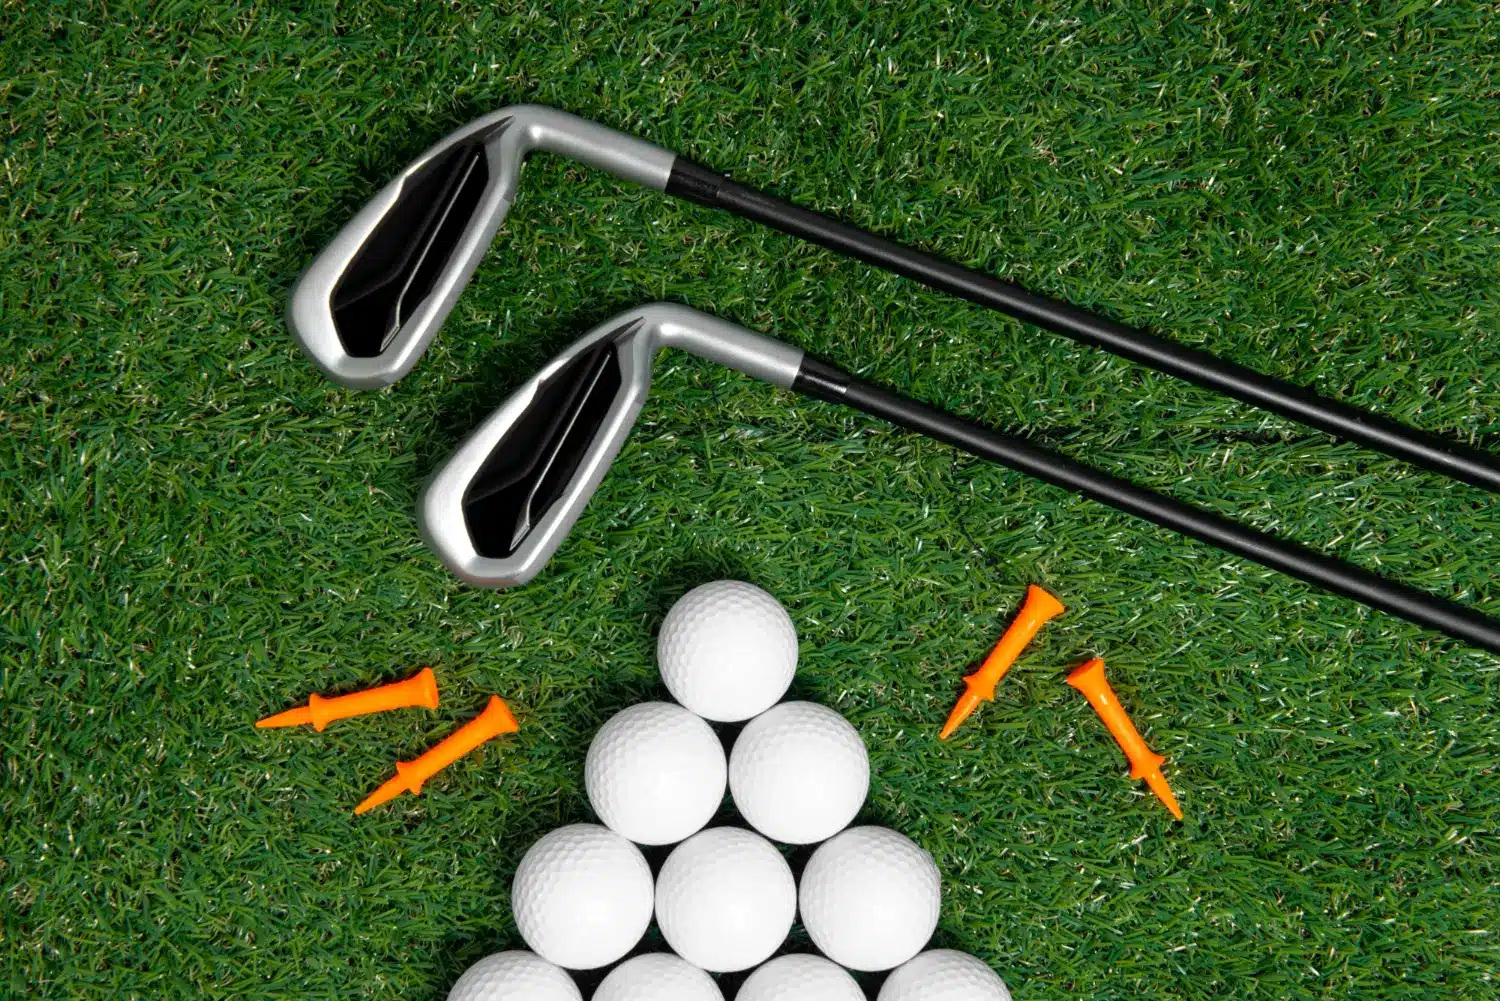 Improve Your Golf Game With JustGolfStuff.ca’s Quality Golf Equipment And Accessories